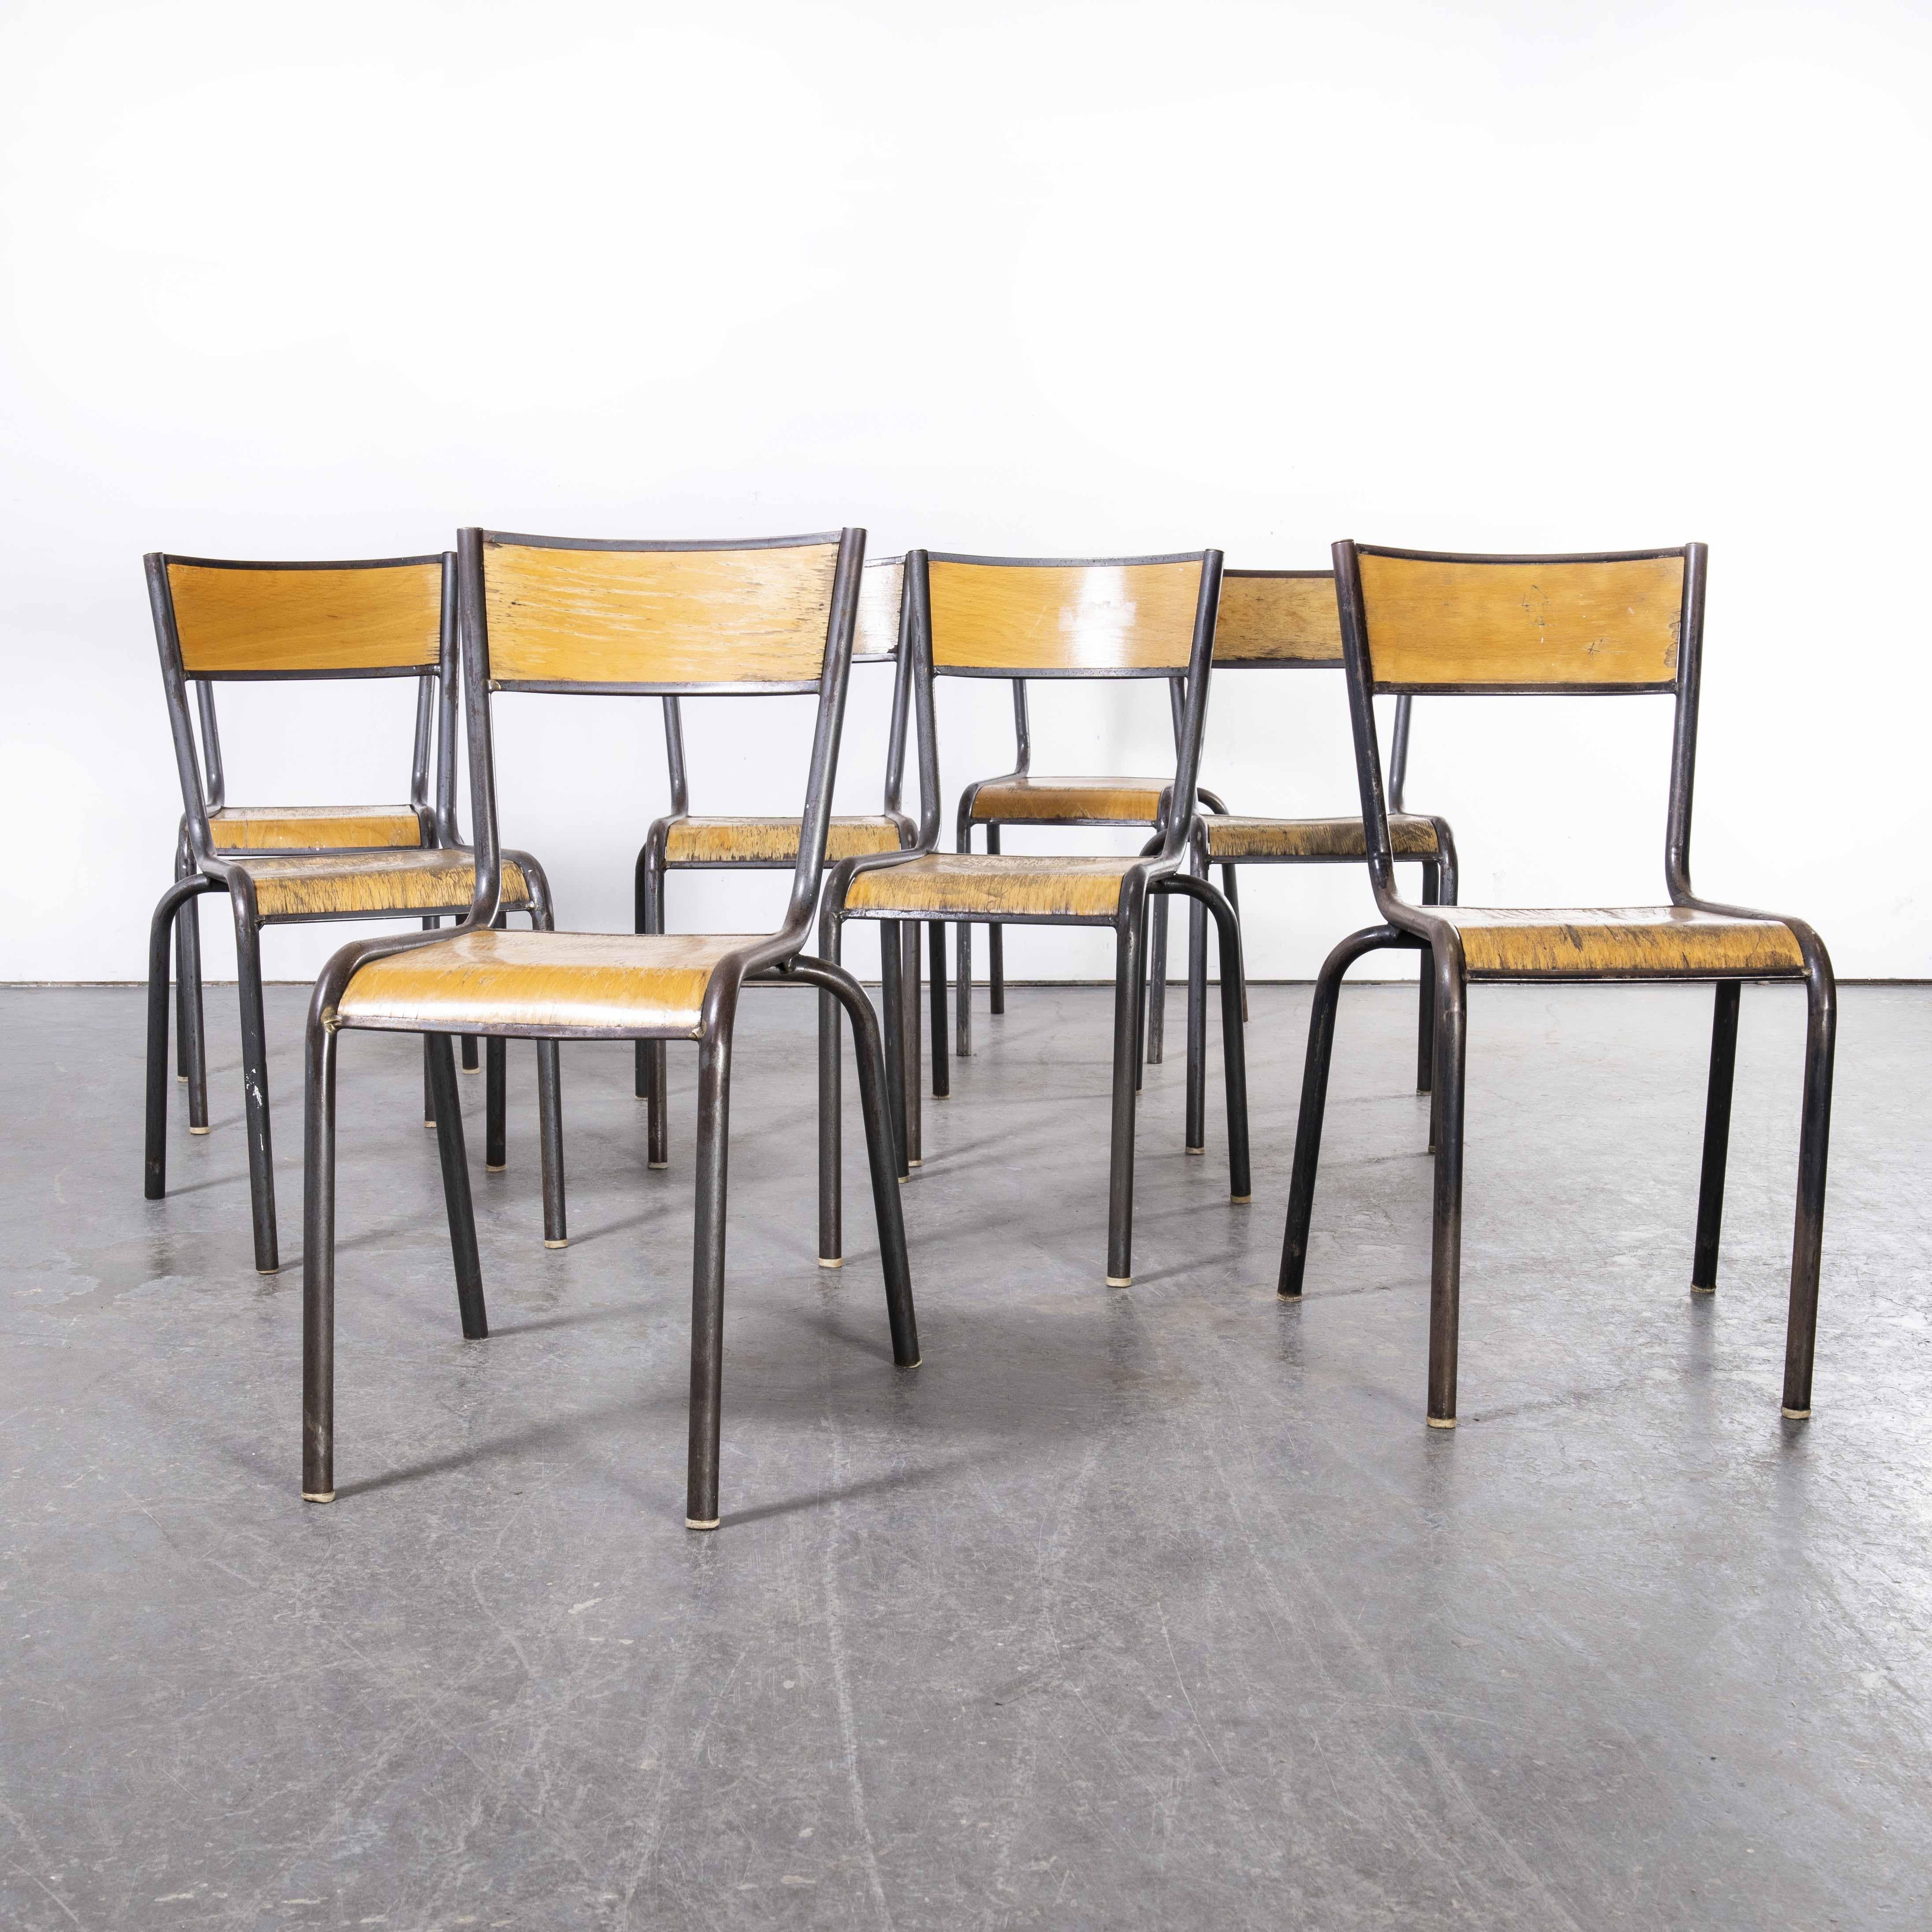 1960’s French Mullca stacking chair 510 – graphite Frame – Set of eight
1960’s French Mullca stacking chair – graphite frame – pair. One of our most favourite chairs, in 1947 Robert Muller and Gaston Cavaillon created the company that went on to